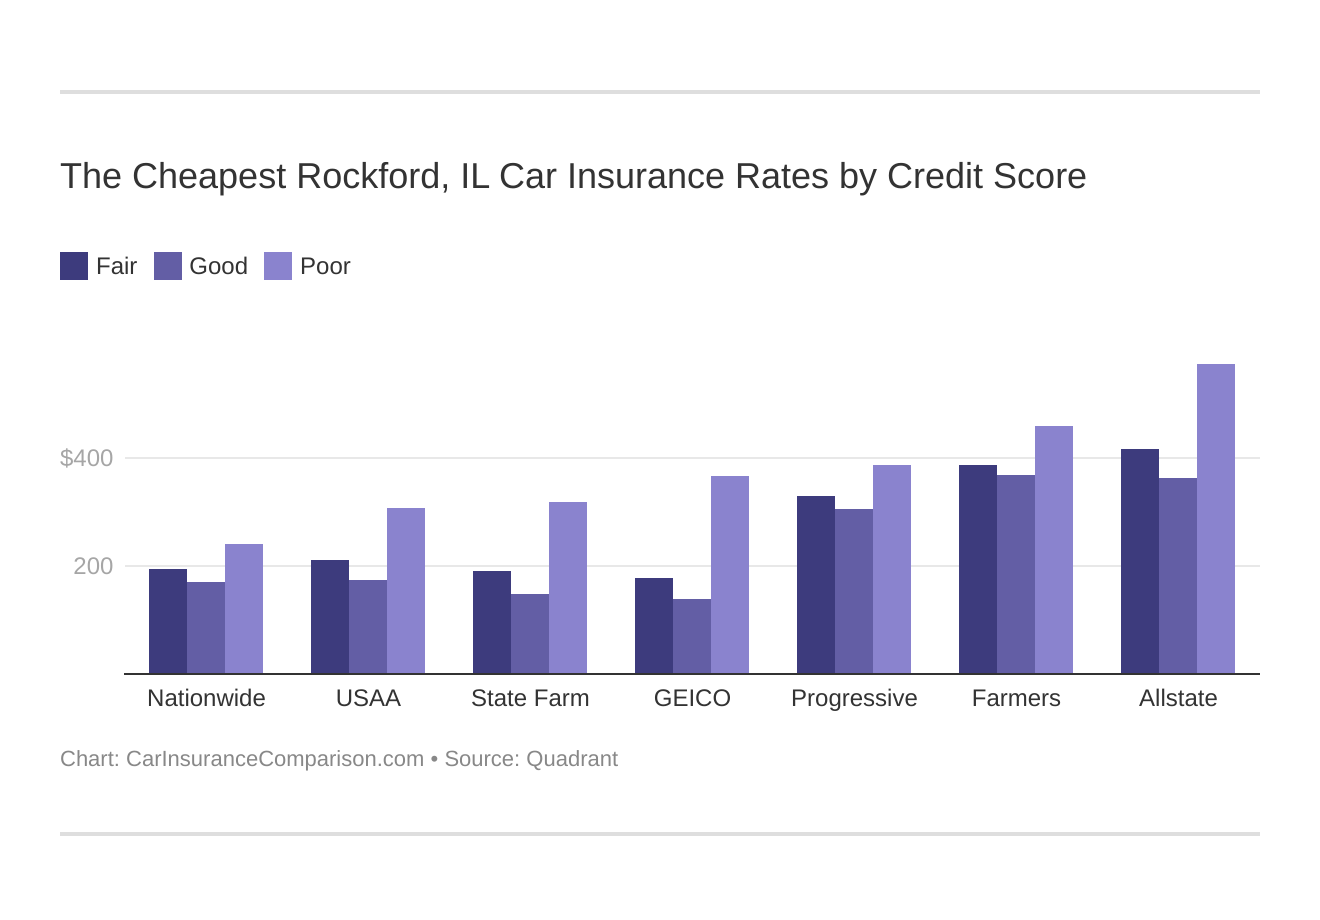 The Cheapest Rockford, IL Car Insurance Rates by Credit Score